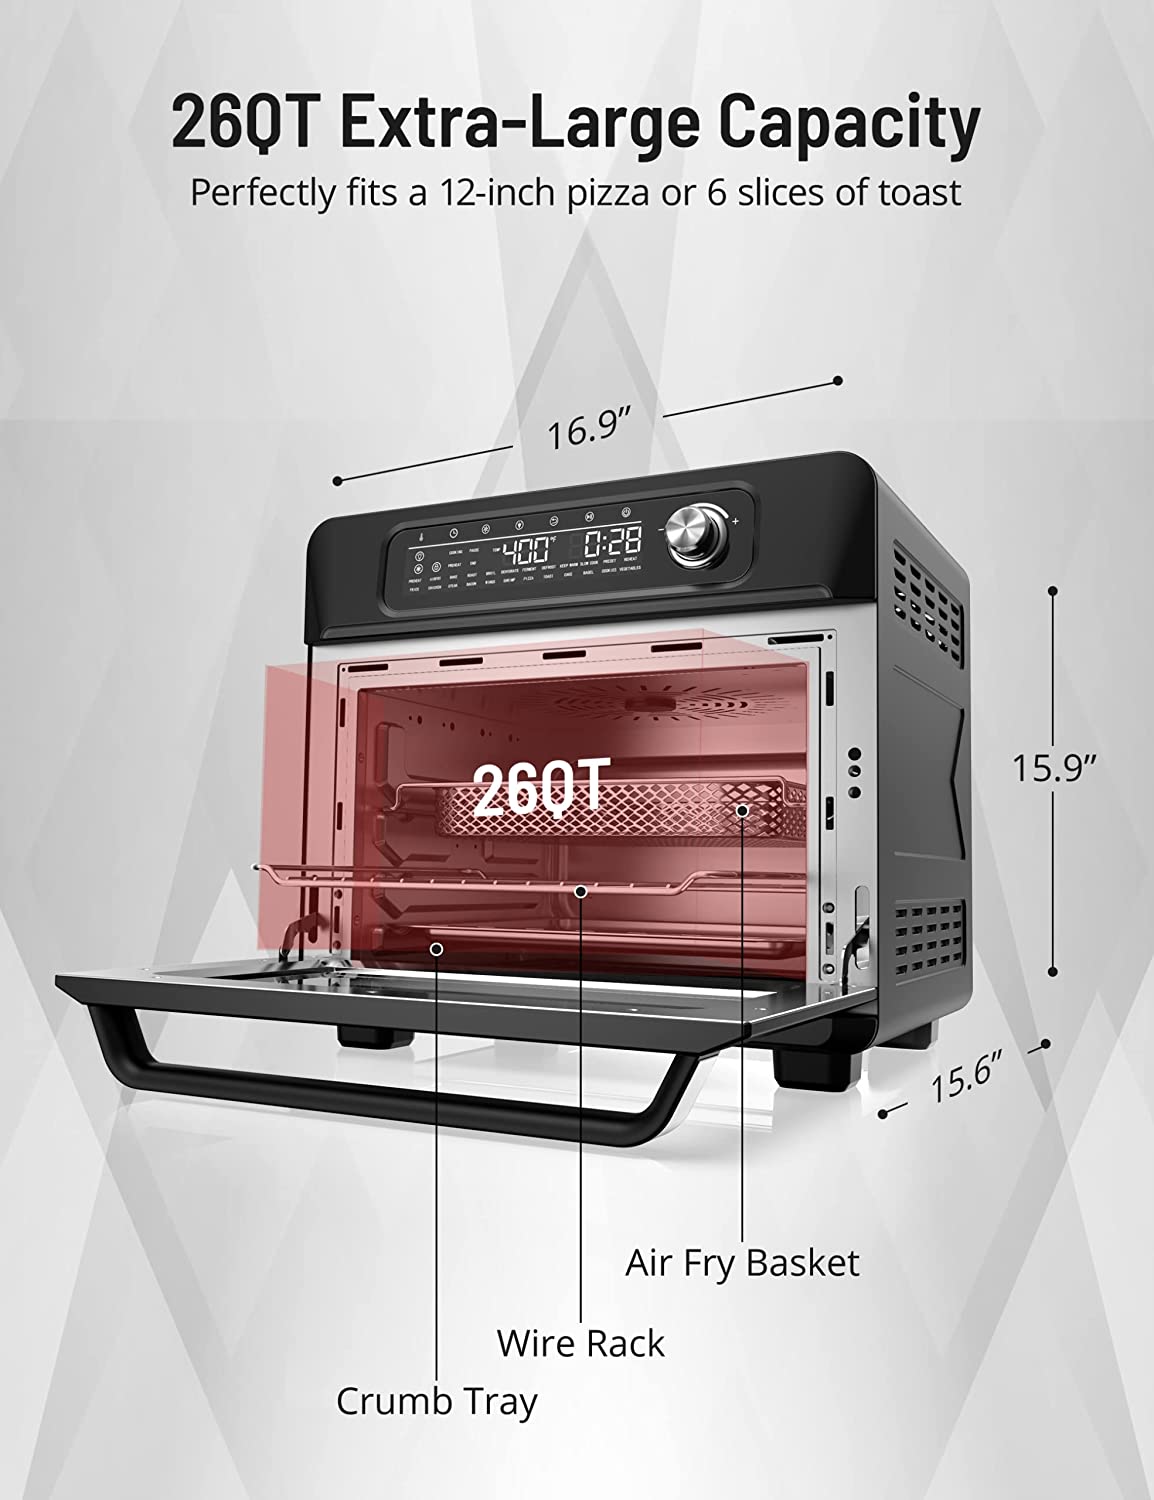 Introducing the French Door 360 Air Fryer with XL 26-qt Capacity